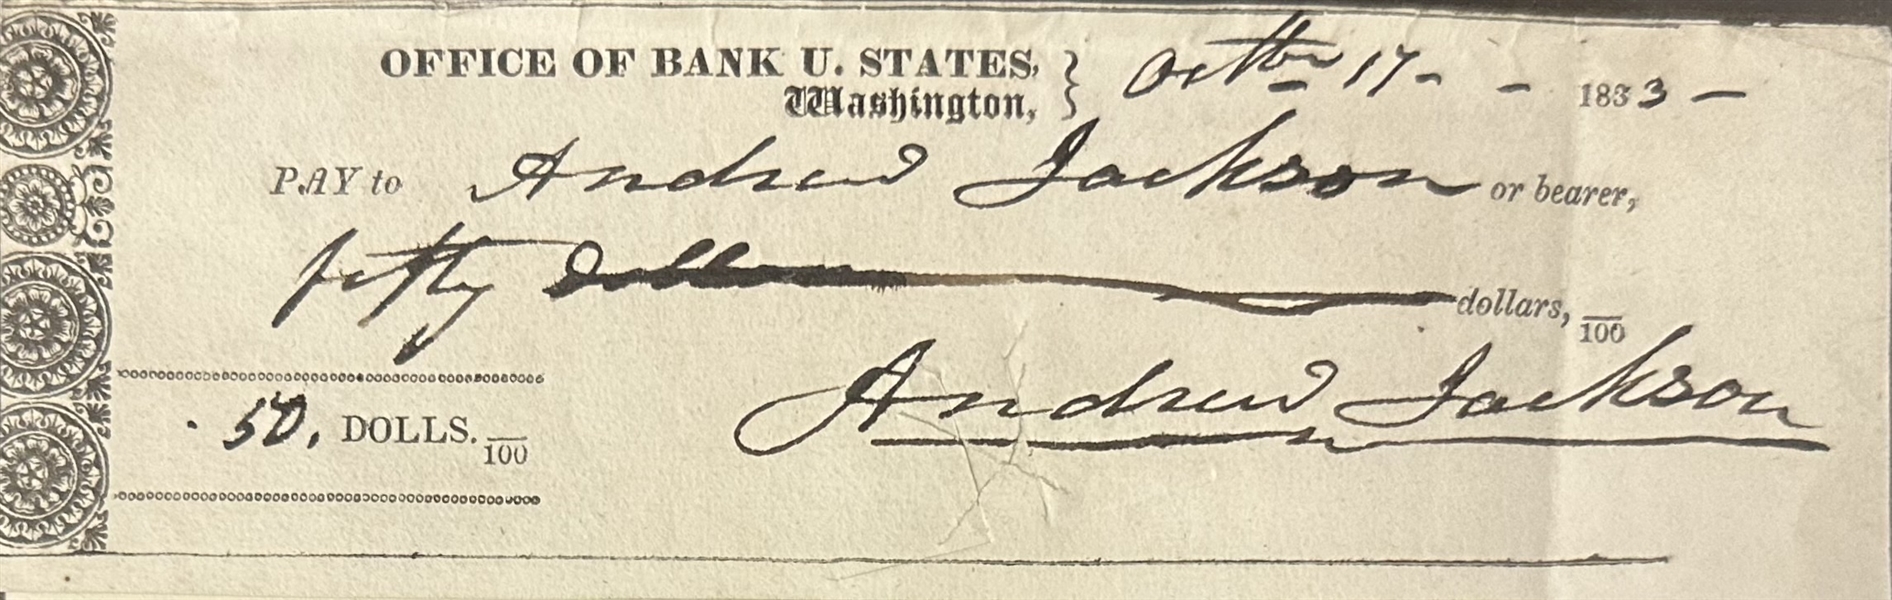 Andrew Jackson Check Signed Twice as President